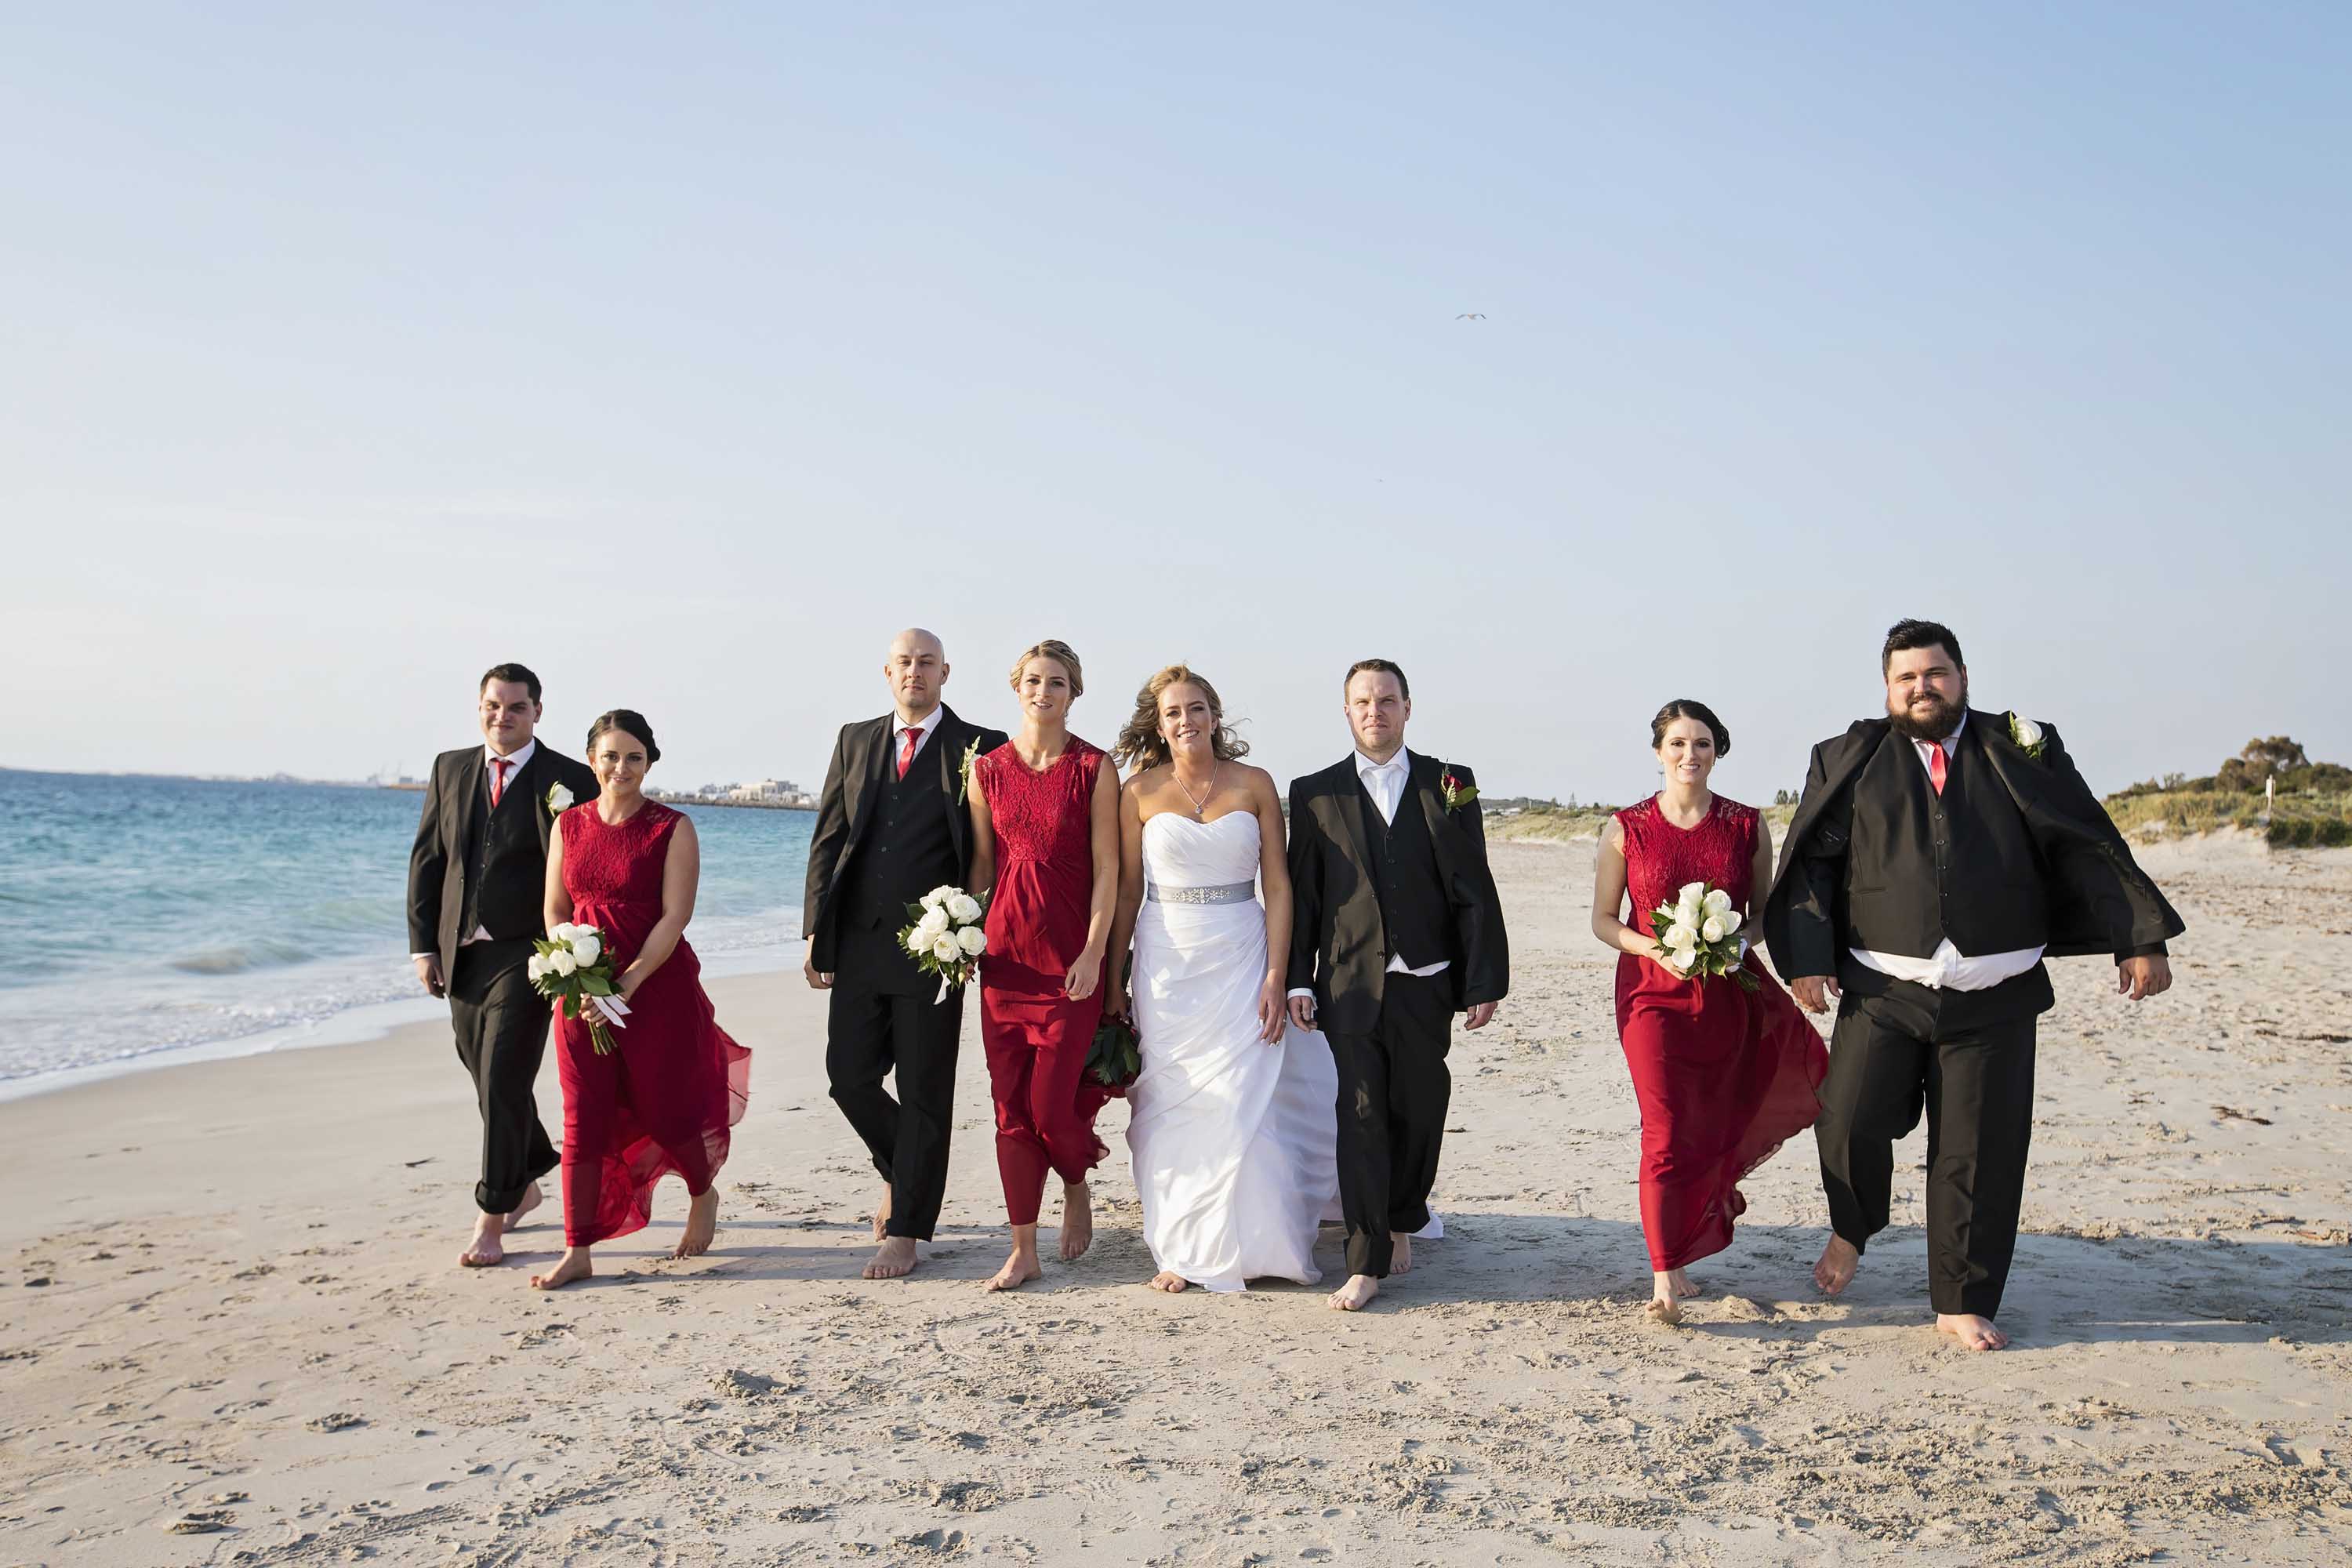 Bridal party on beach outside Coogee beach life saving club